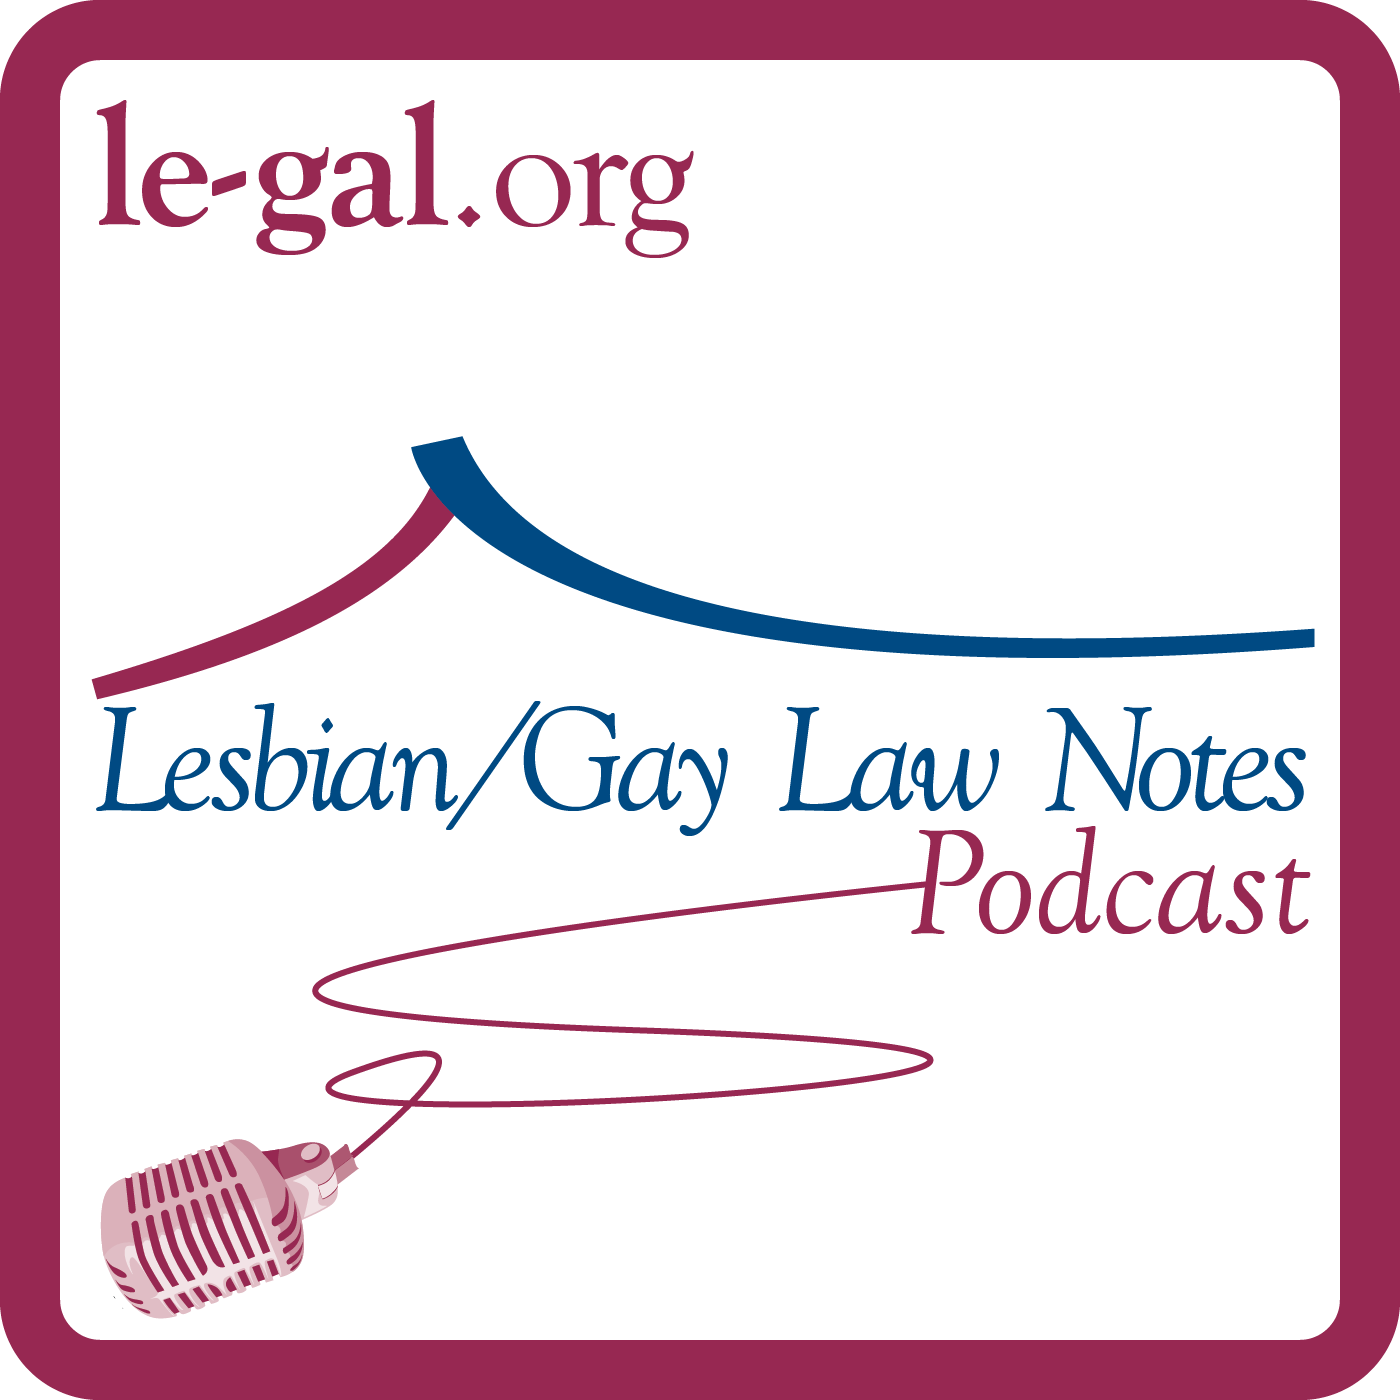 Lesbian/Gay Law Notes Podcast: Summer 2013